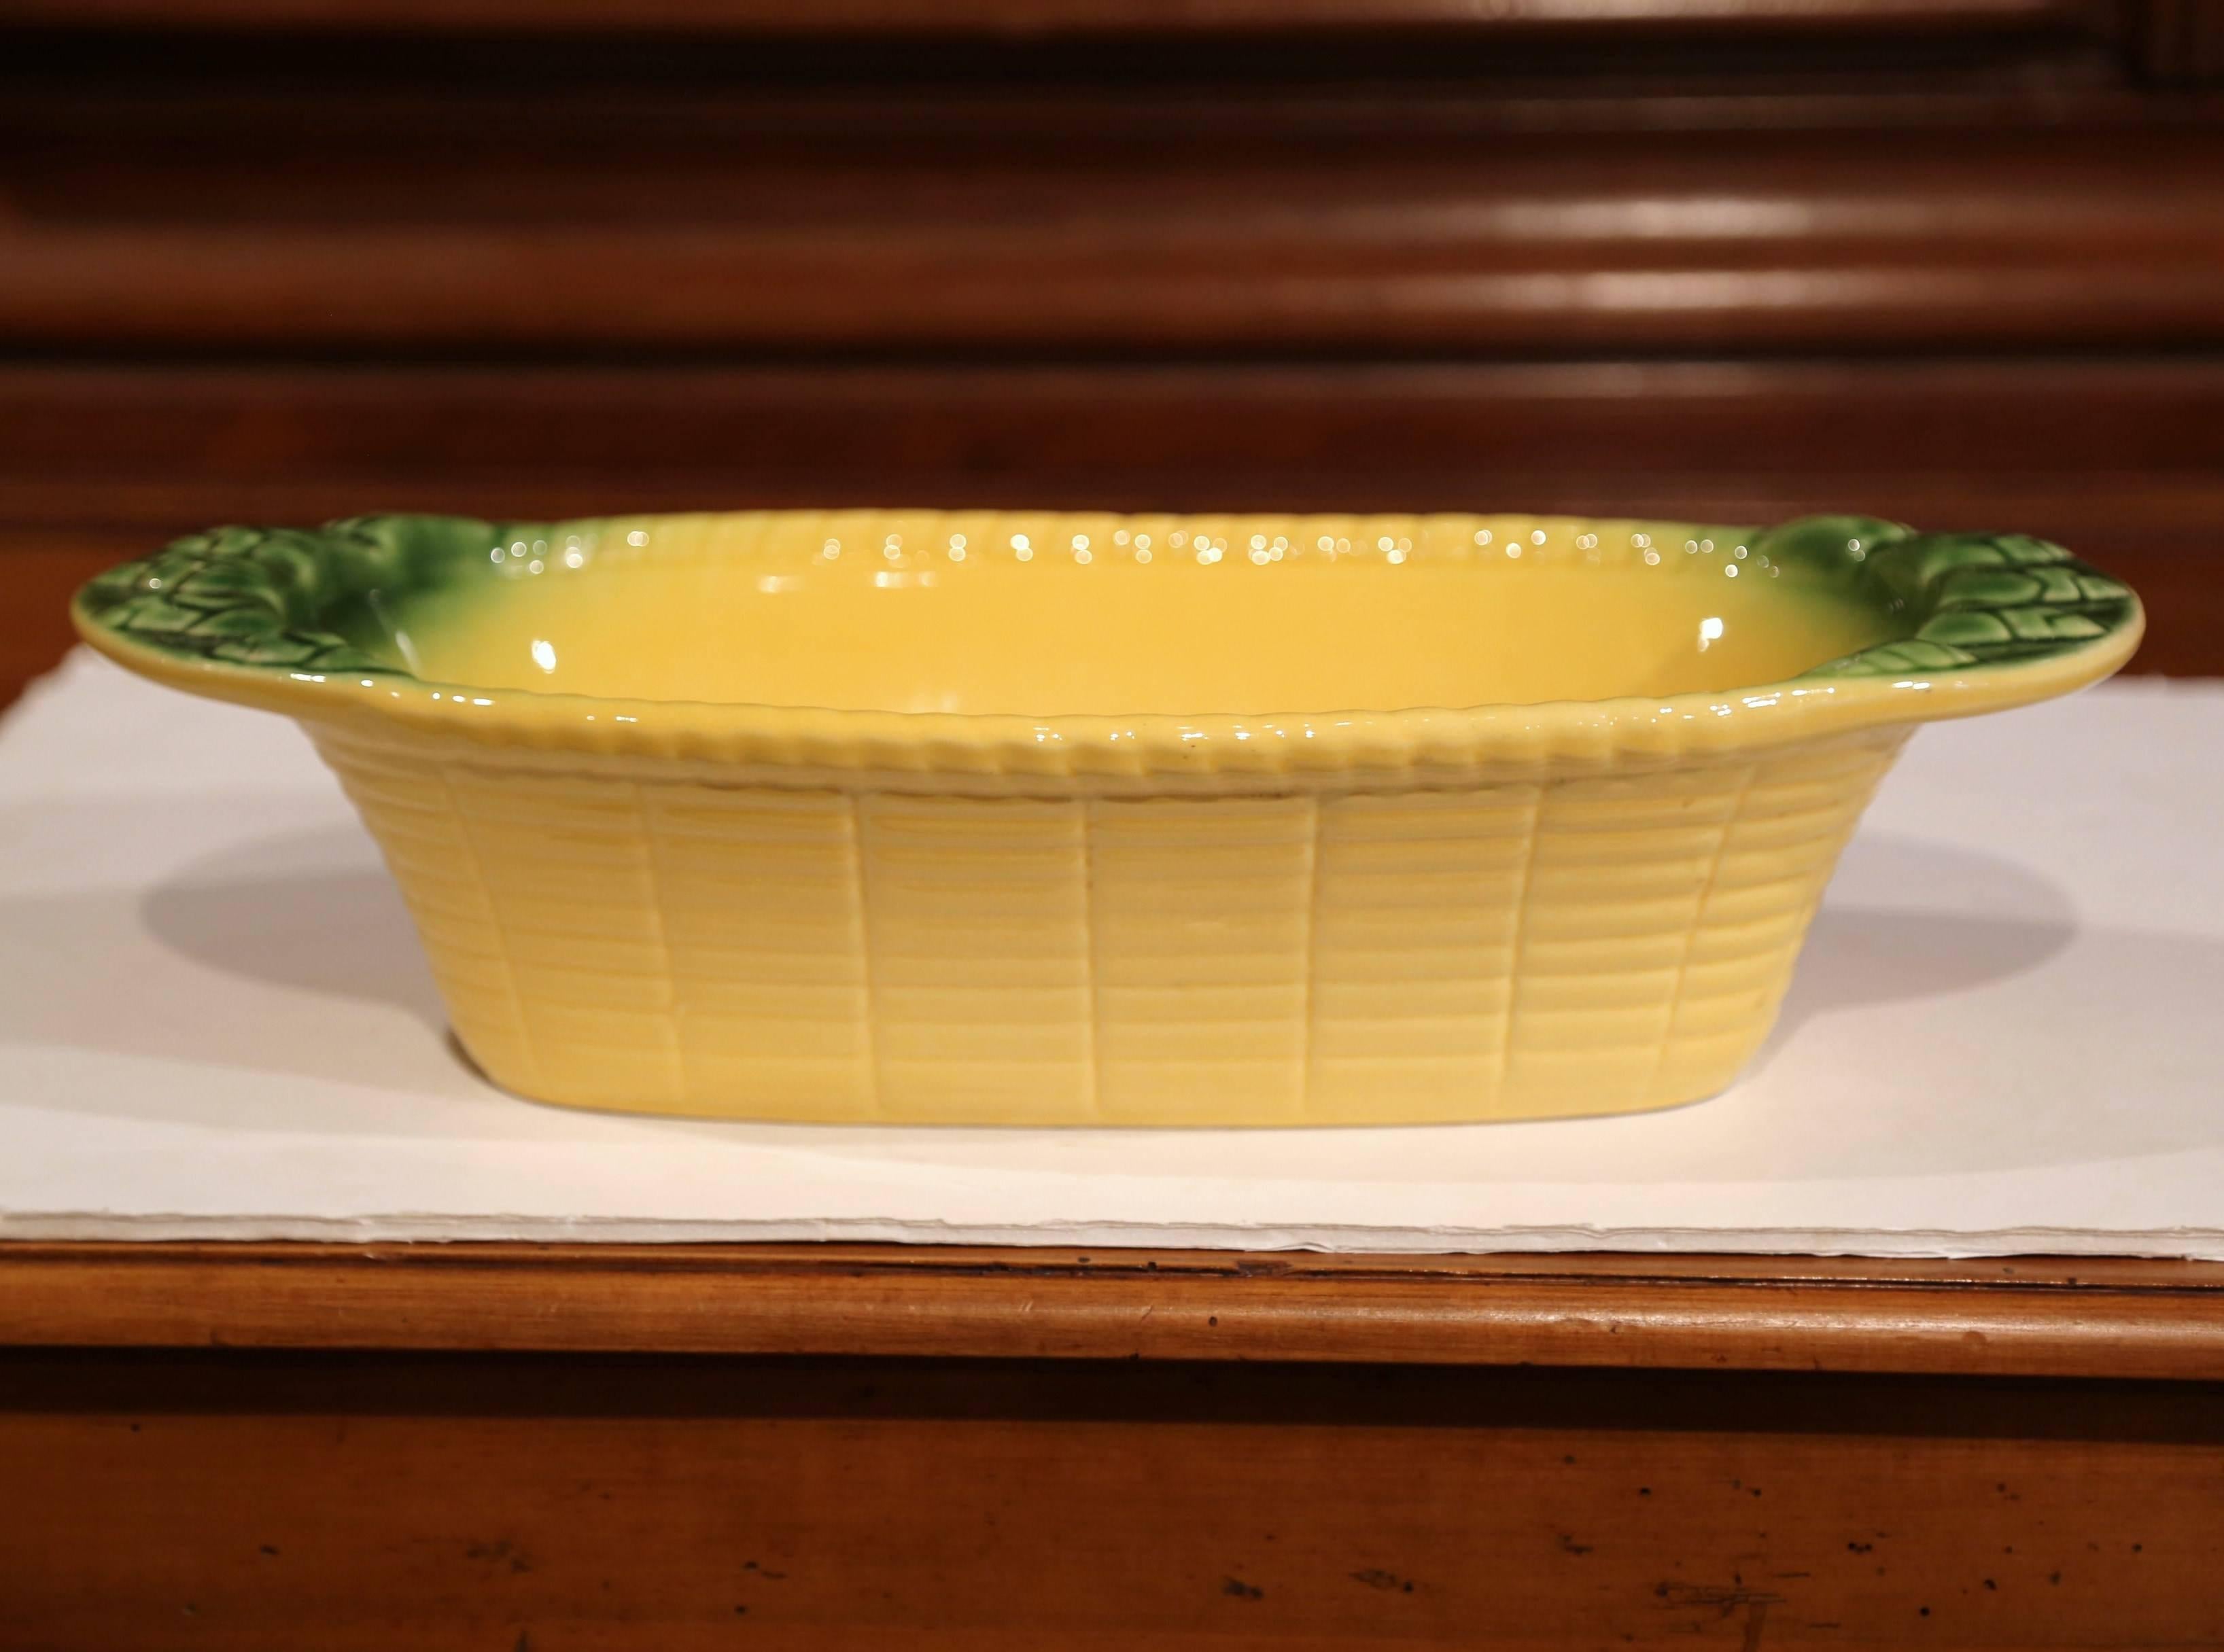 Display your fruit or other perishables in this colorful antique Majolica dish. Created in Provence, France crafted, circa 1920, the decorative porcelain bowl resembles an ear of corn and features a woven basket motif with decorative green handles